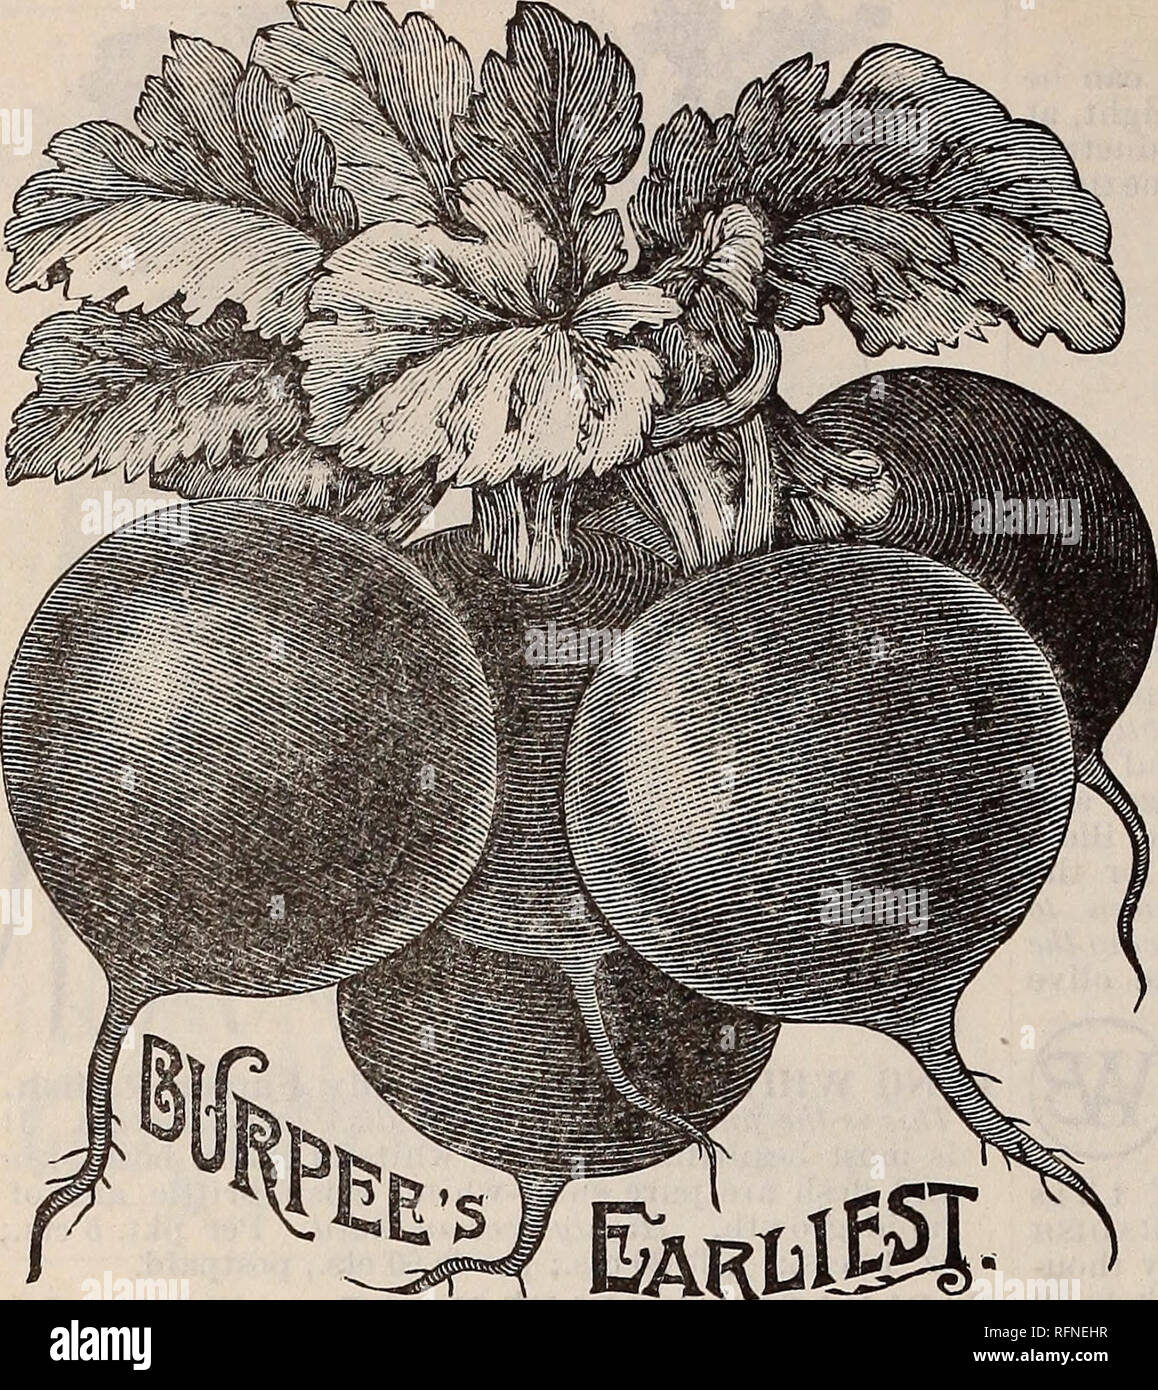 . Burpee's farm annual written at Fordhook Farm. Nurseries (Horticulture) Pennsylvania Philadelphia Catalogs; Vegetables Seeds Catalogs; Plants, Ornamental Catalogs; Flowers Seeds Catalogs. W. ATLEE BURPEE &amp; CO., PHILADELPHIA.. BURPEE'S EARLIEST (SCA button) RADISH. Named and introduced by us in 1887, this new Radish has given excellent satisfaction all over the United States. One customer reports that Burpee's Earliest was ready for the table April 25th, while the French Breakfast, sown the same day, was not ready until a week later. Mr. J. A. Hill, Mooreville, Ala., re- ports that he pla Stock Photo